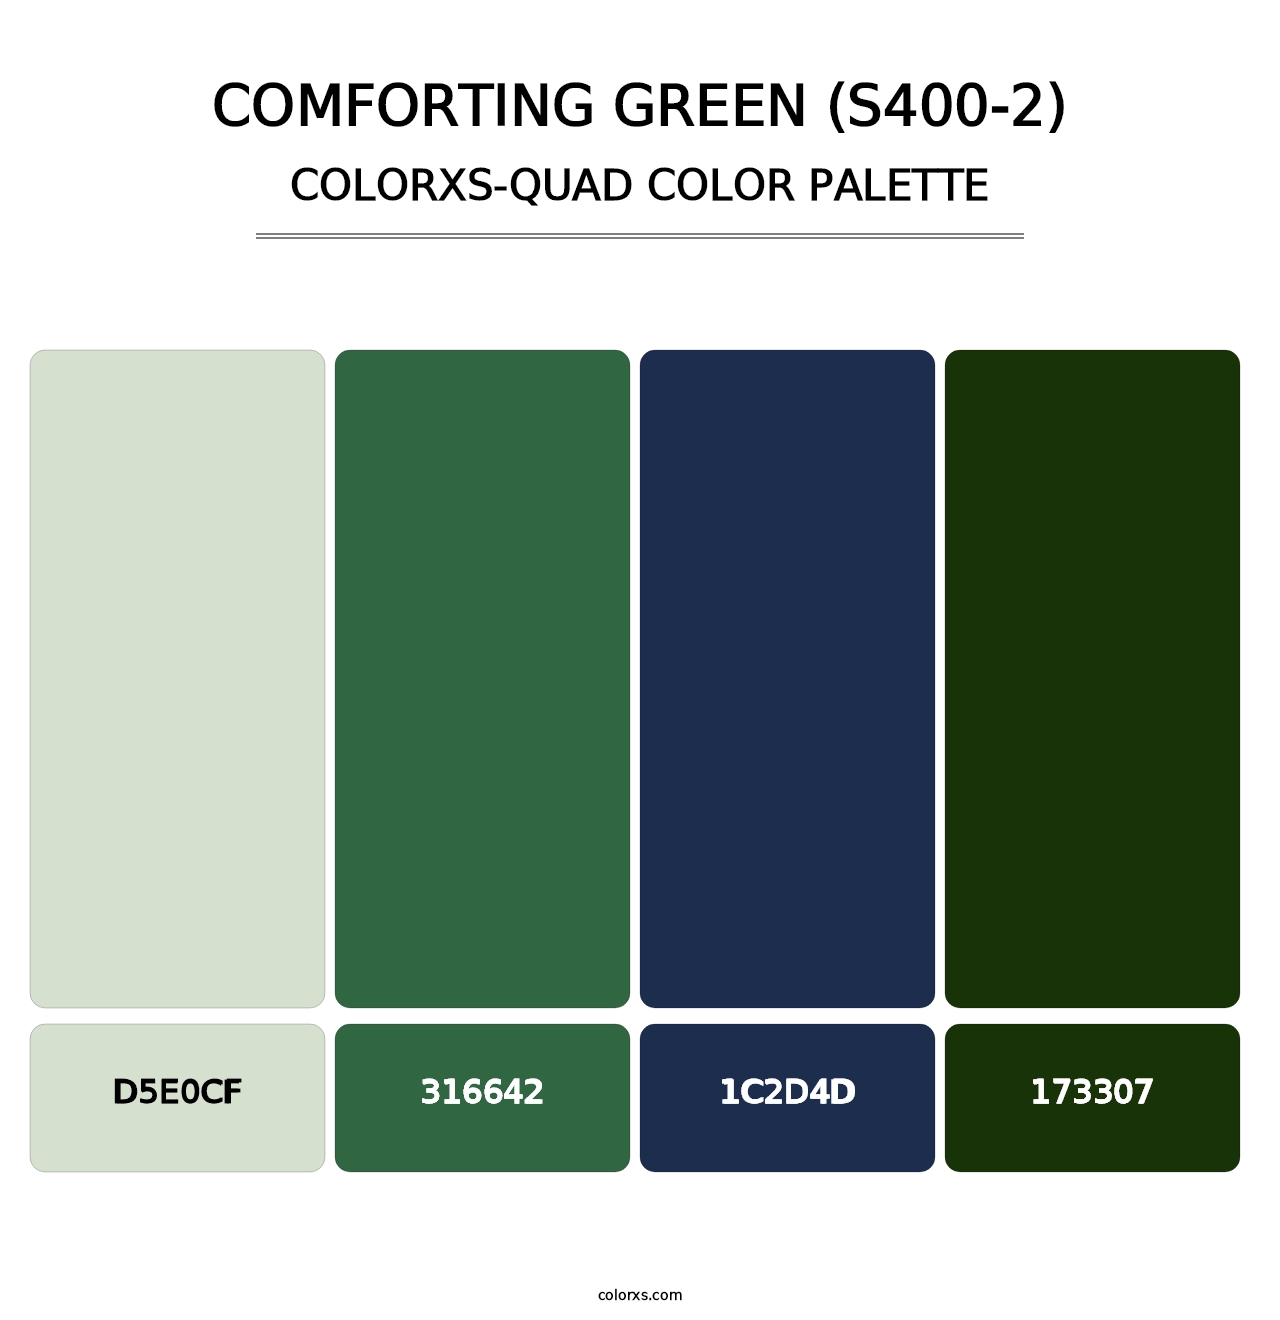 Comforting Green (S400-2) - Colorxs Quad Palette